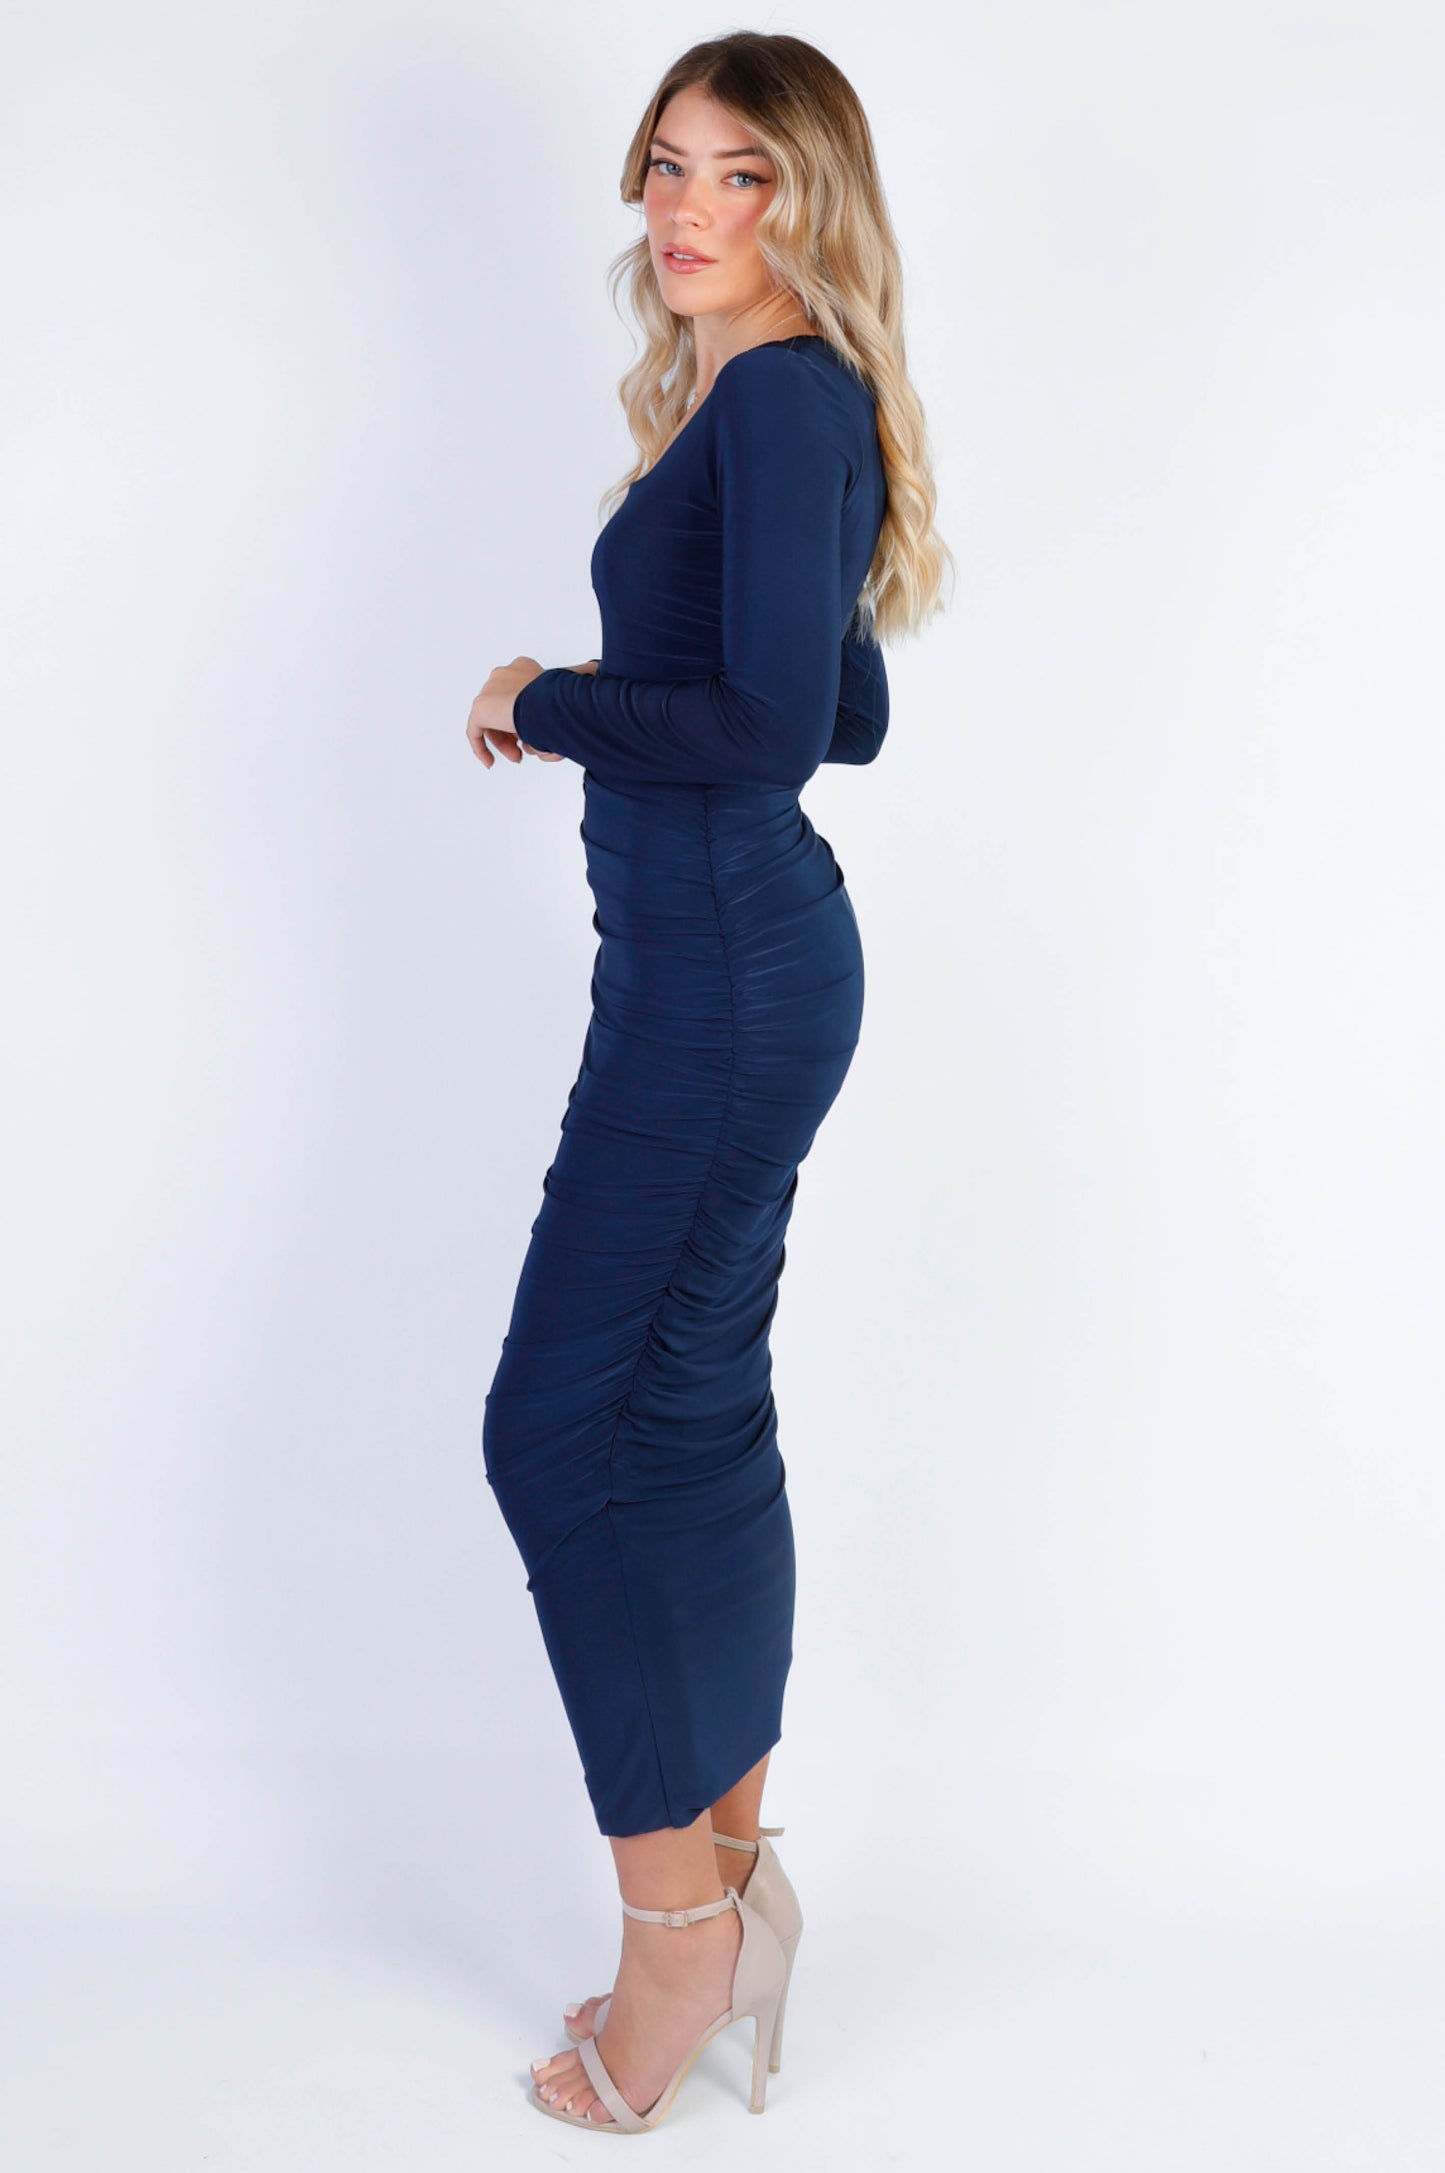 Evie Square Neck Long Sleeve Ruched Midaxi Dress in Navy